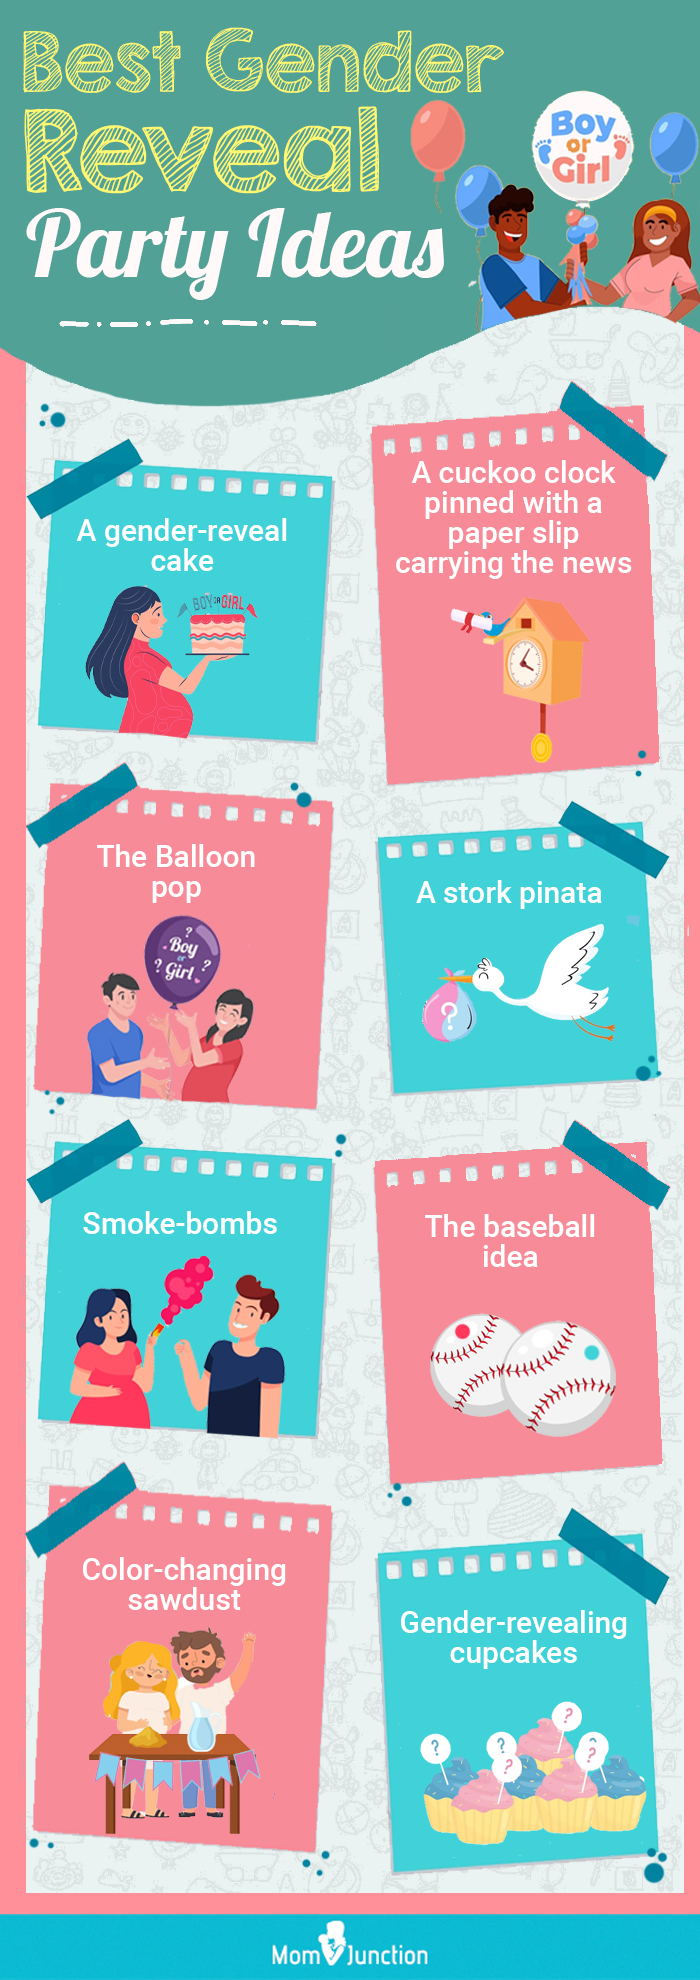 best gender reveal party ideas (infographic)